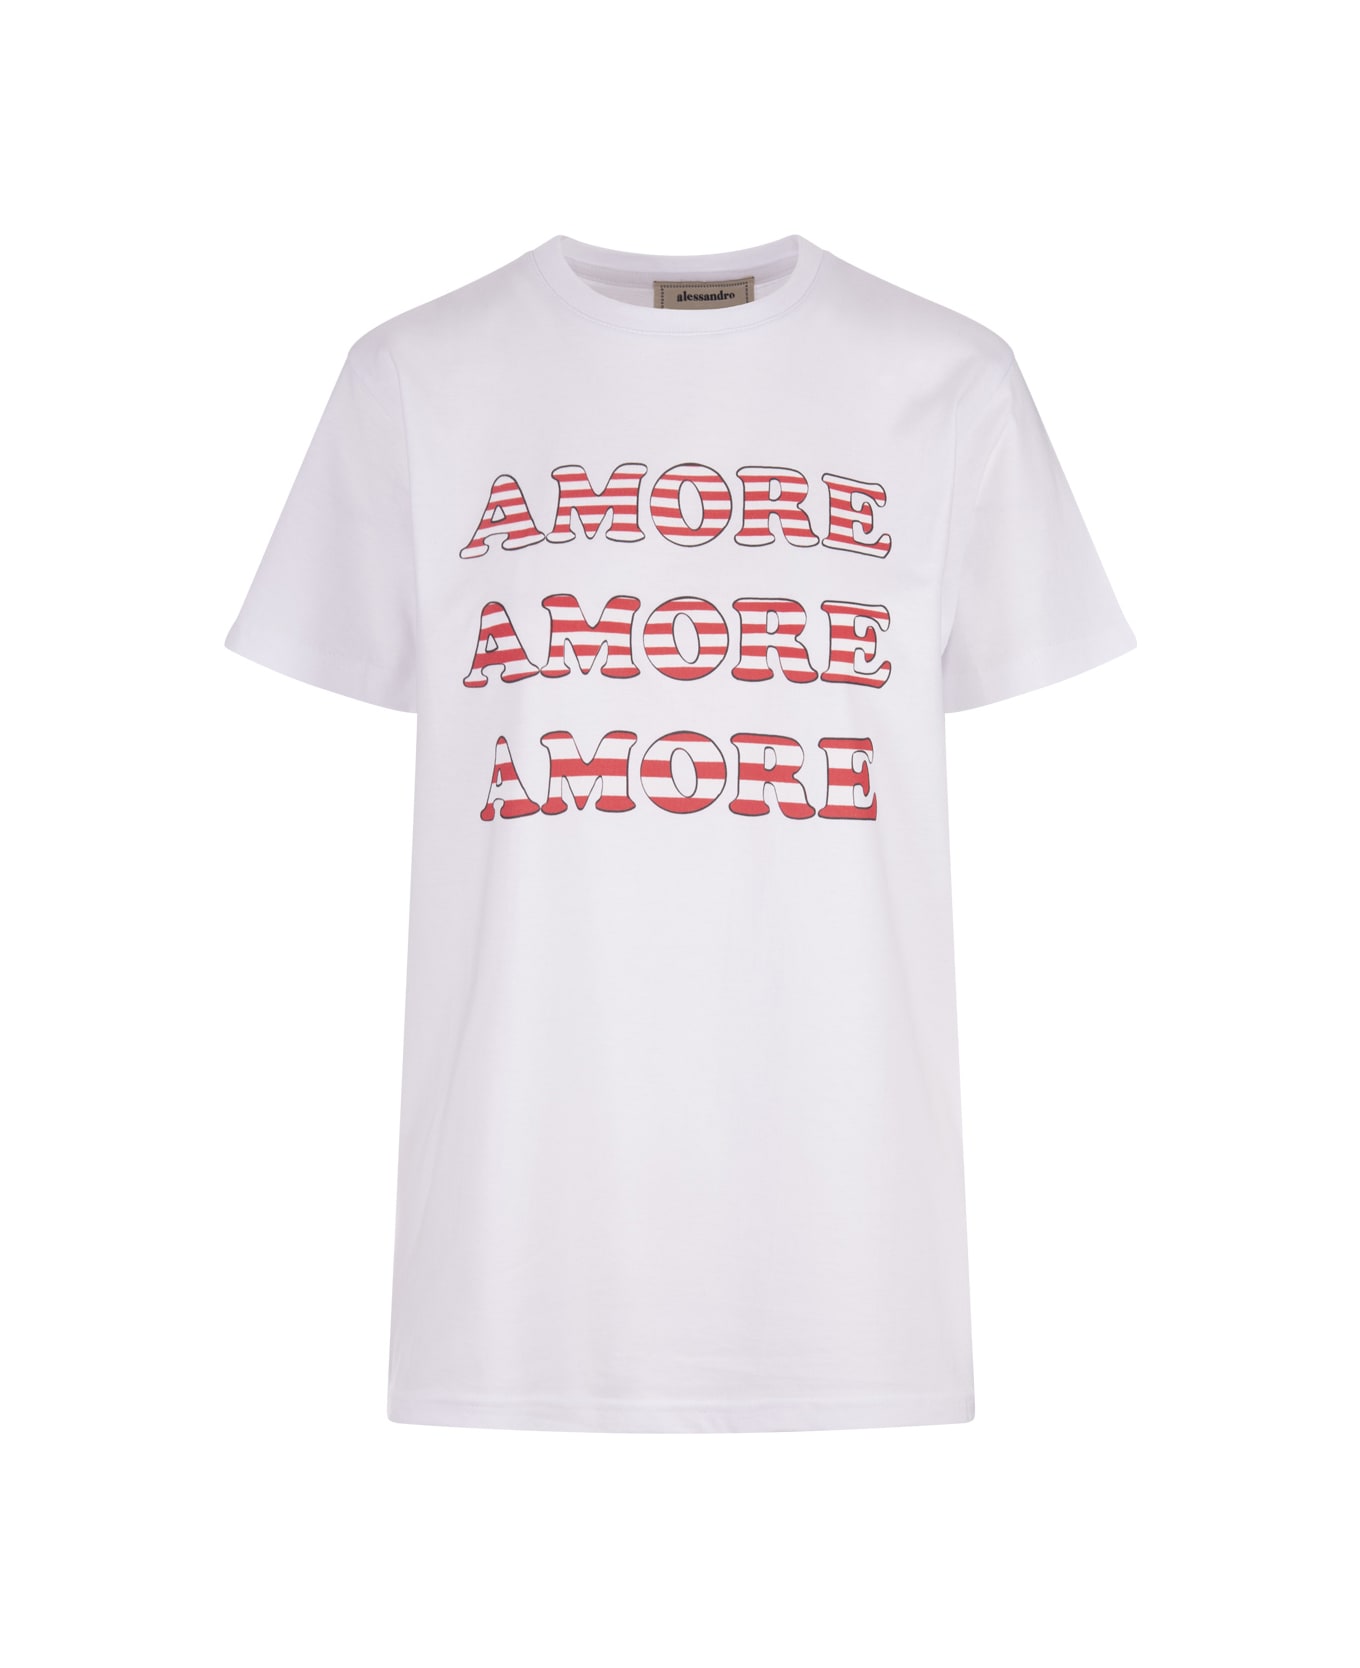 Alessandro Enriquez White T-shirt With Red Amore Print - White